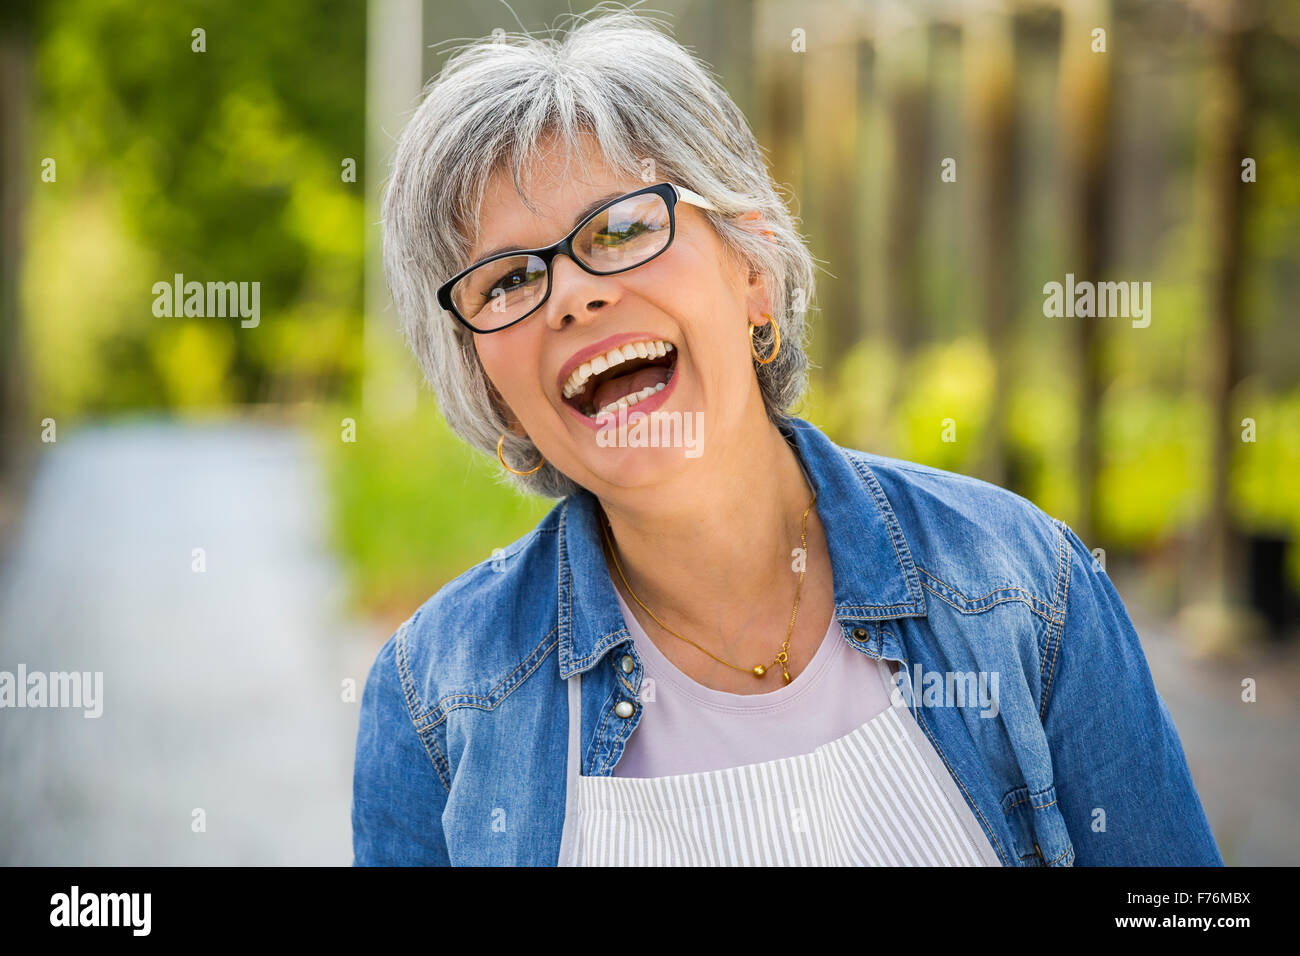 Beautiful mature woman working in a greenhouse, looking at camera while laughing Stock Photo